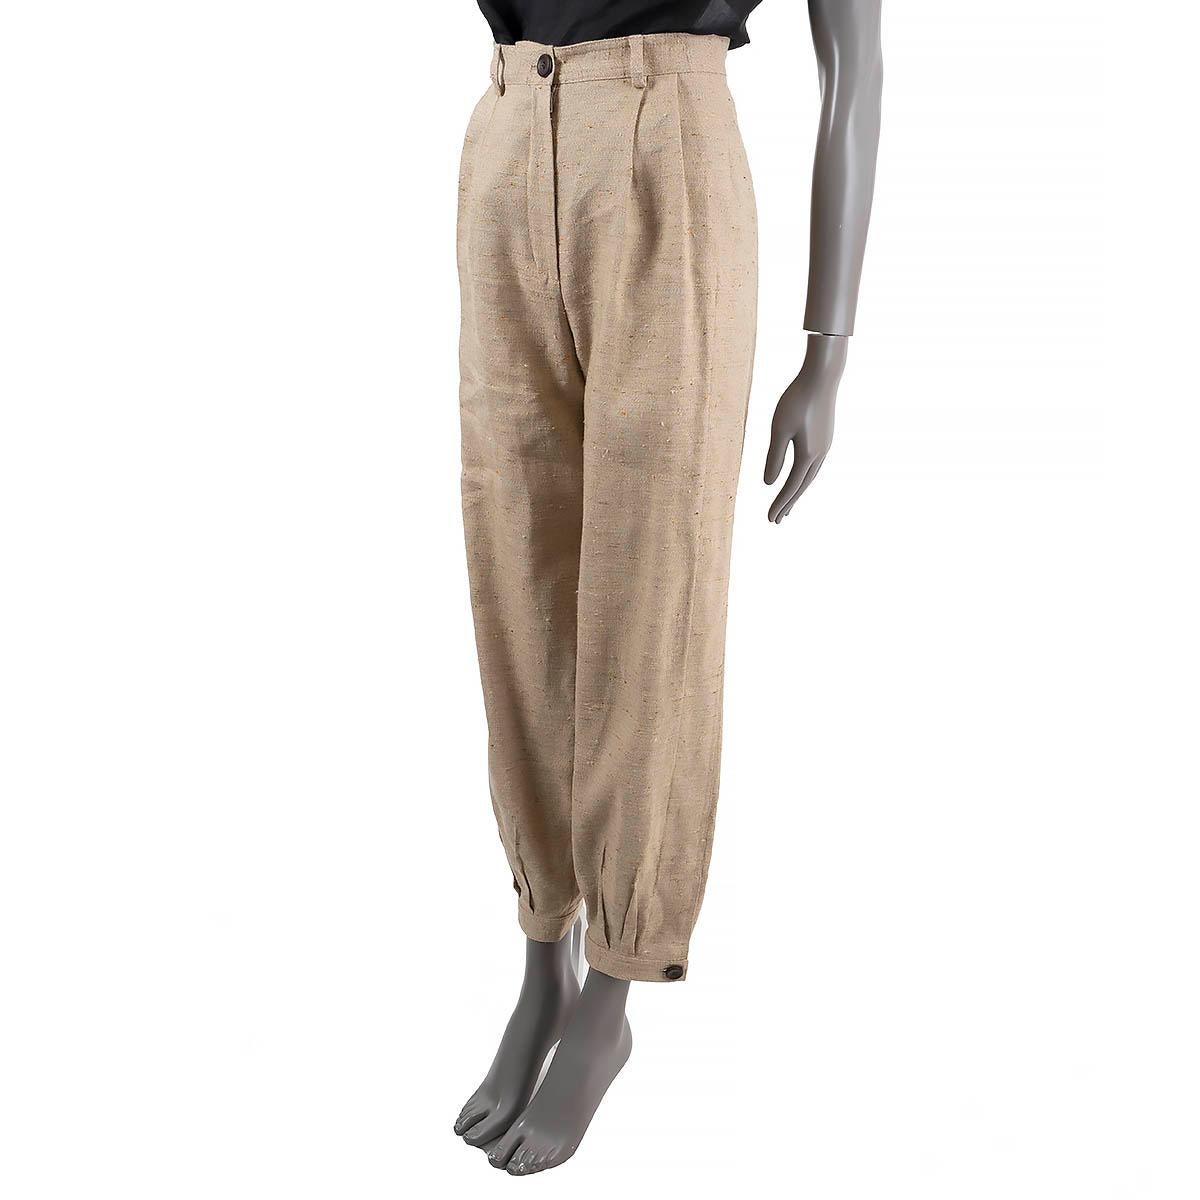 100% authentic Loro Piana Phyllis pleated tweed pants in beige linen (61%), cashmere (20%) and silk (19%). Feature two slant pockets, tapered-button cuffs and belt loops. Unlined. Have been worn and are in virtually new condition.

2023